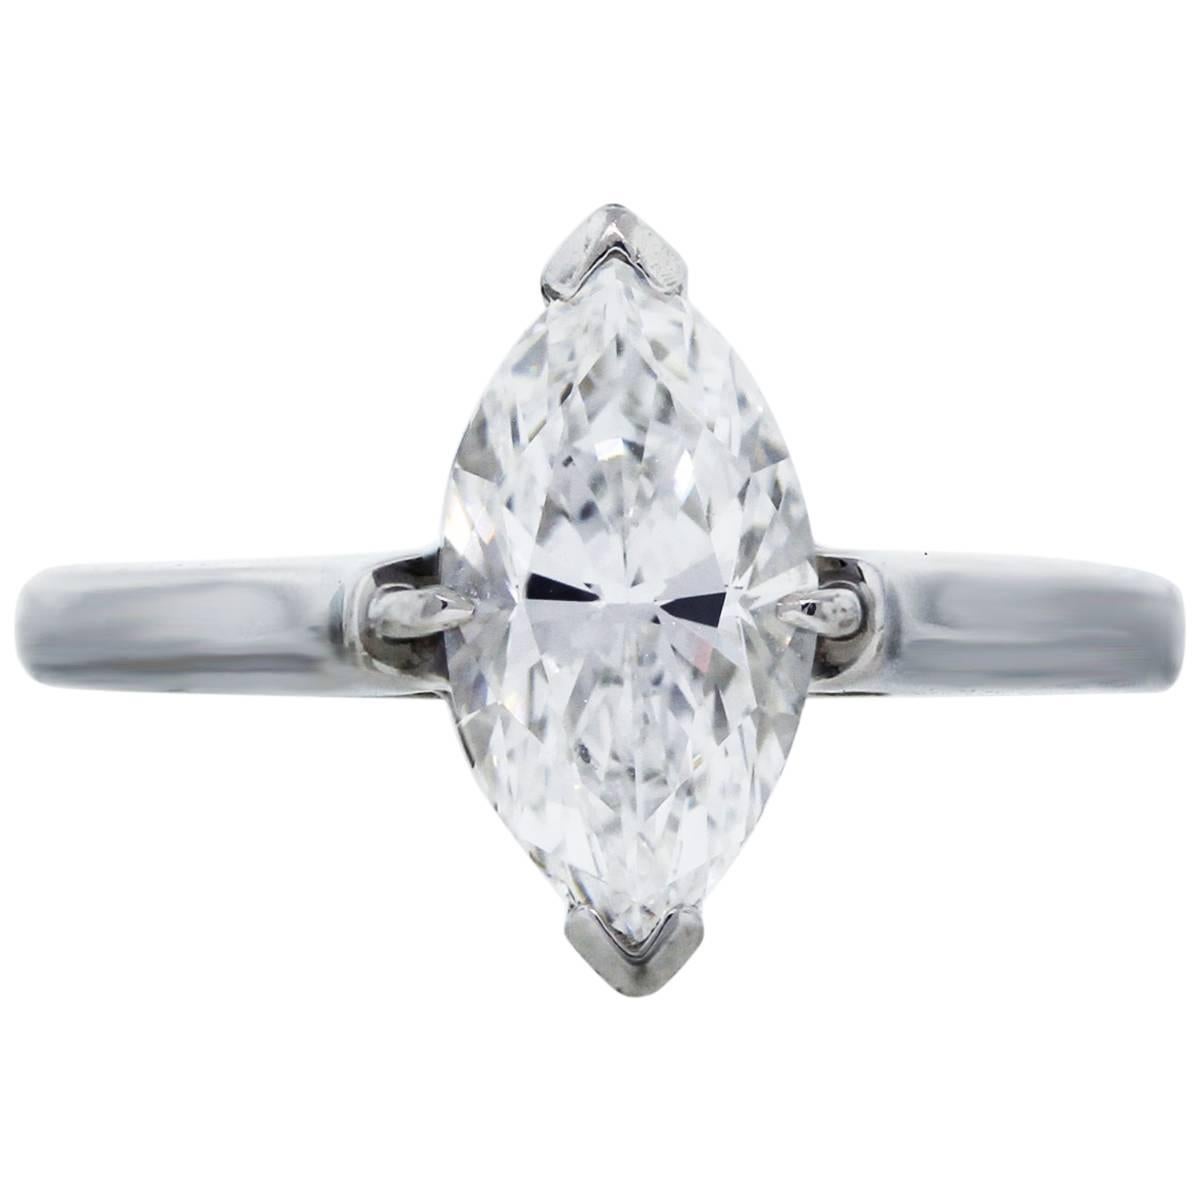 Tiffany & Co. Marquise Cut Solitaire Diamond Engagement Ring